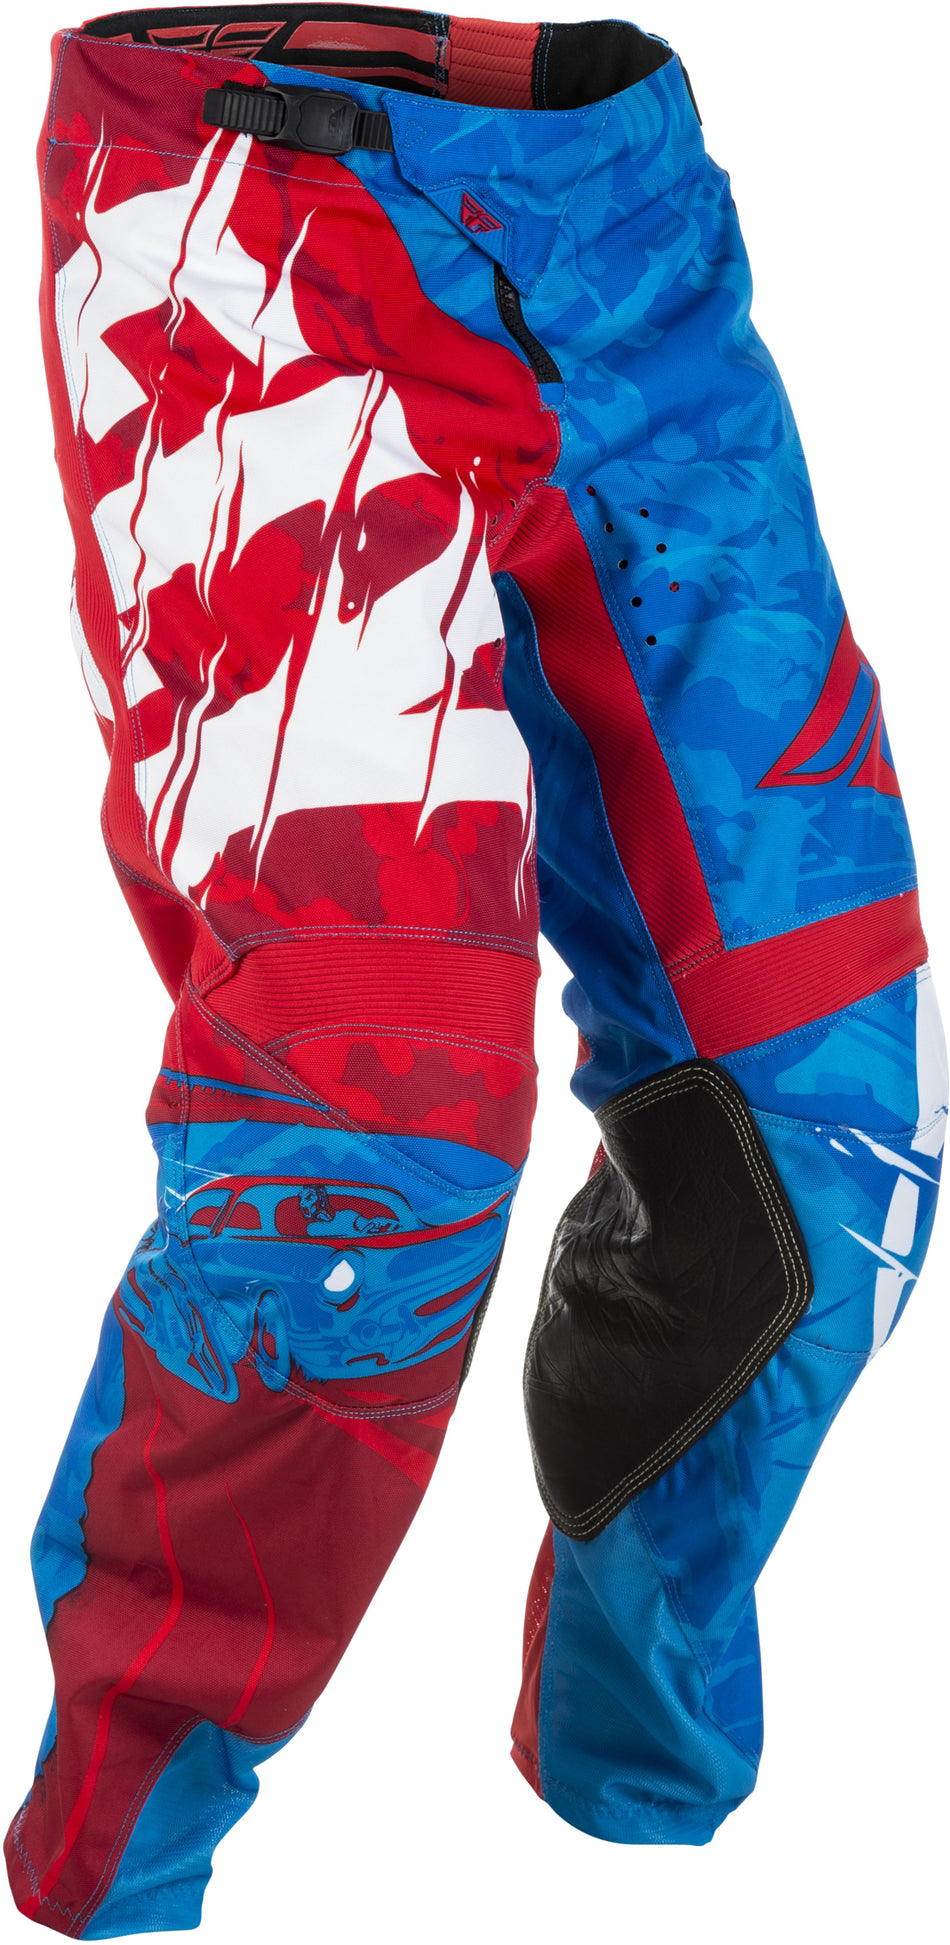 FLY RACING Kinetic Outlaw Pants Red/Blue Sz 40 371-53240